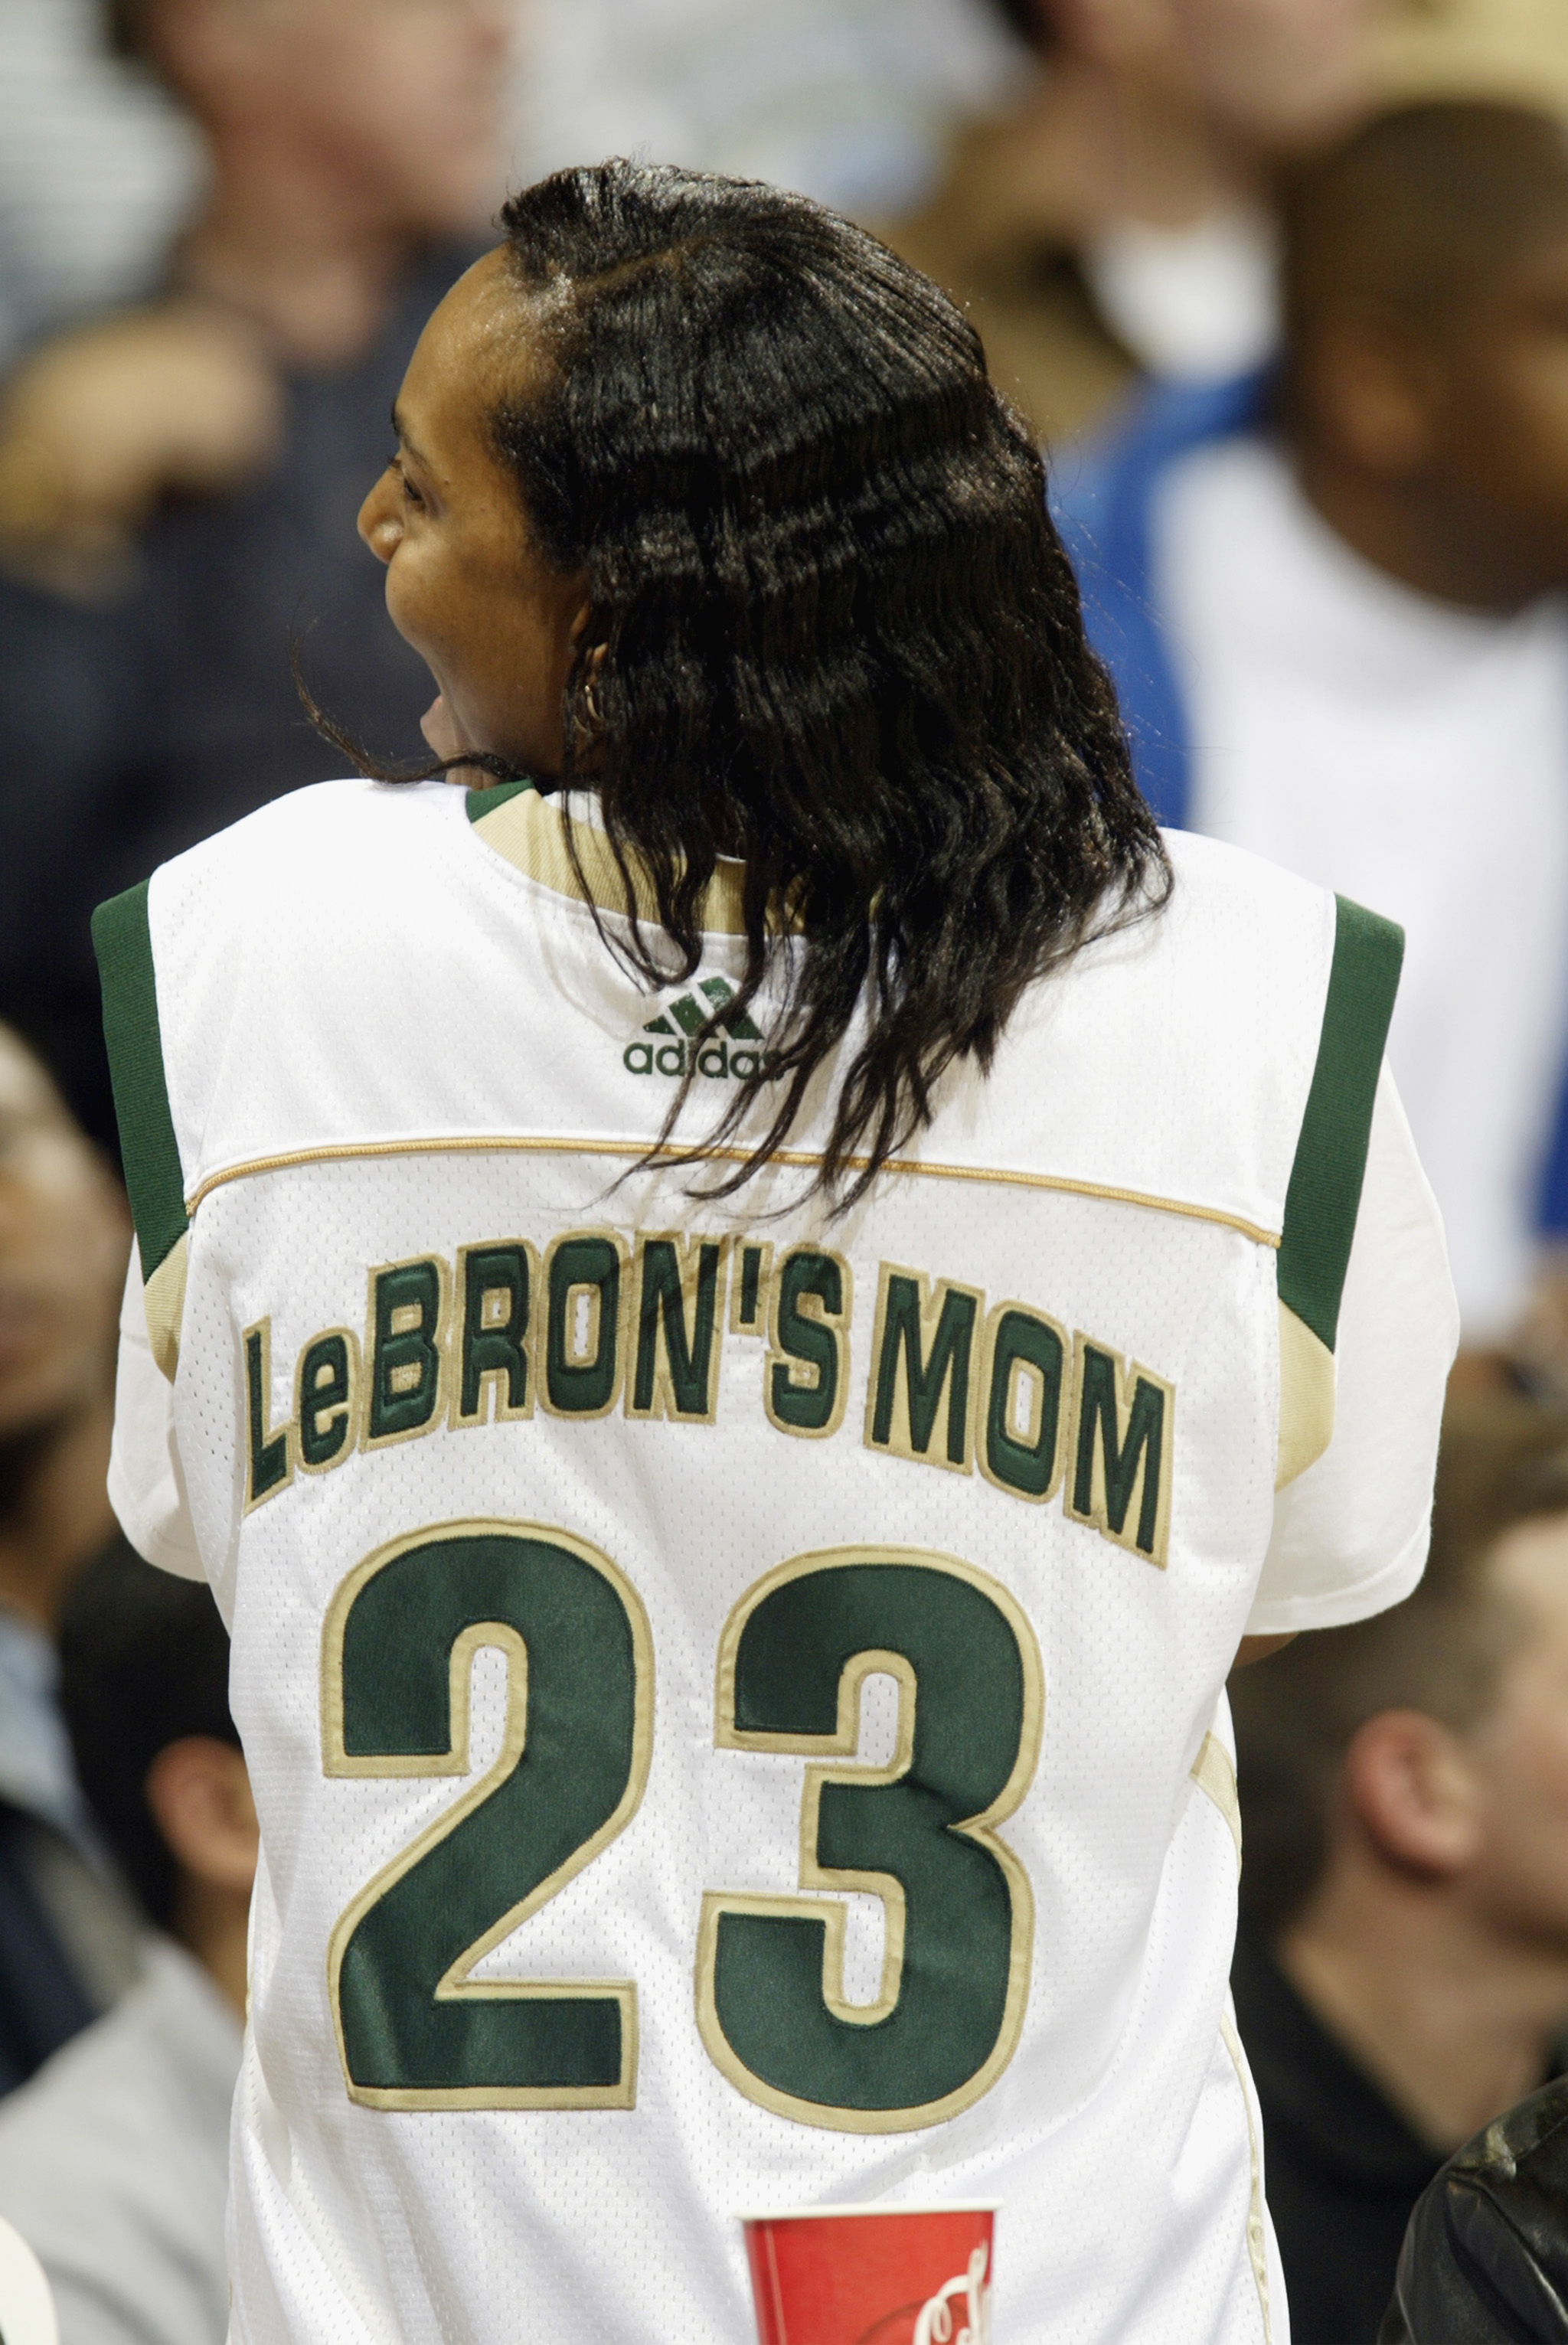 Gloria James, mother of LeBron James #23 of St. Vincent-St. Mary's High School, shows off her own team jersey at UCLA's Pauley Pavilion on January 4, 2003, in Los Angeles, California | Source: Getty Images